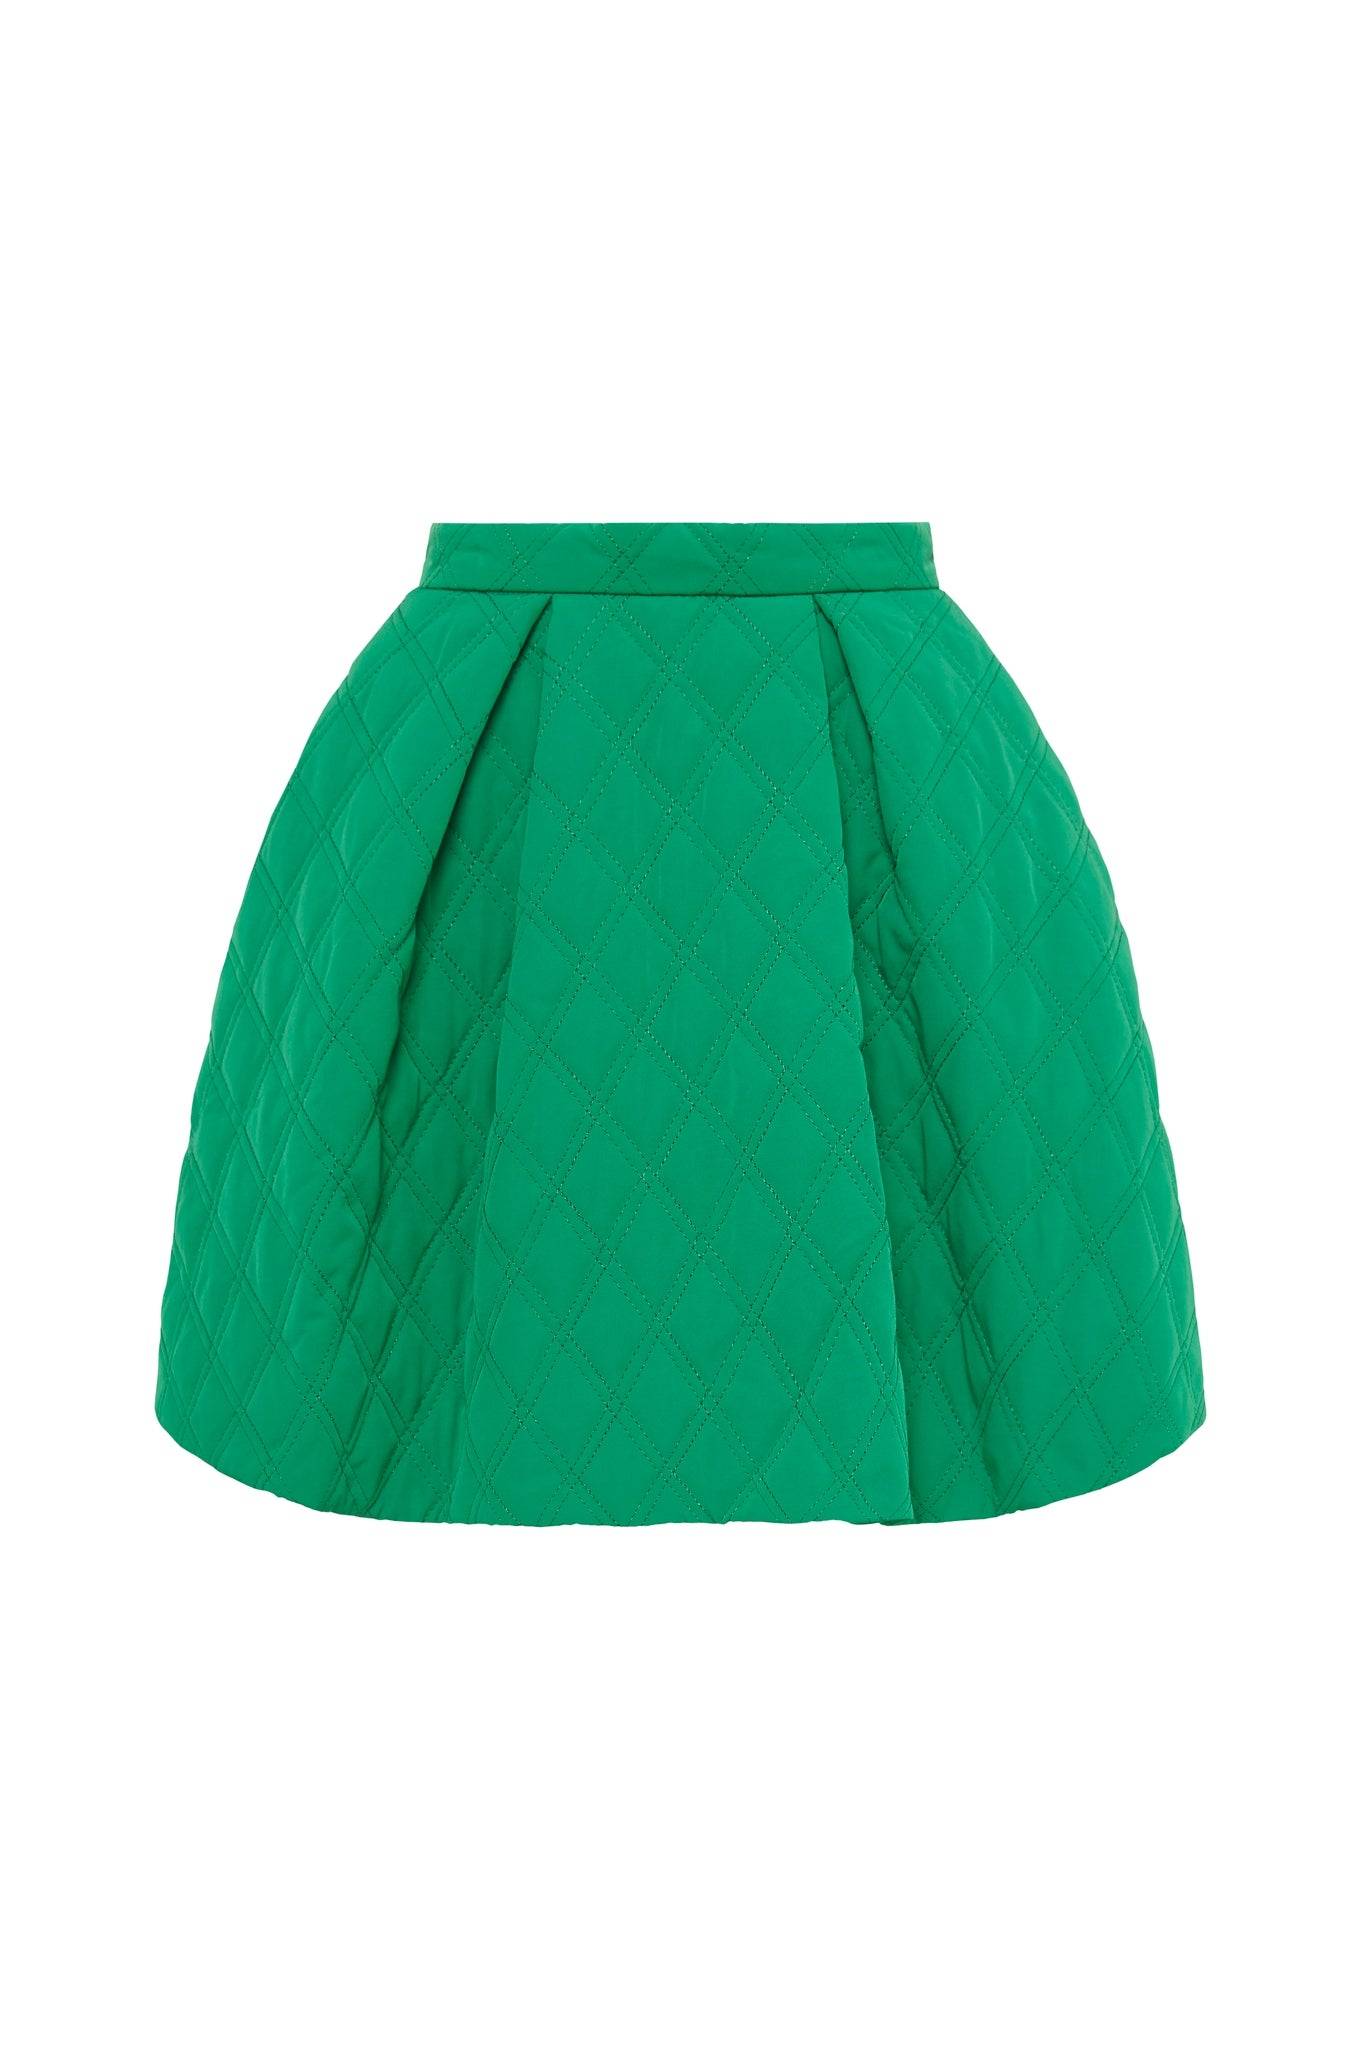 Emerald green quilted mini skirt